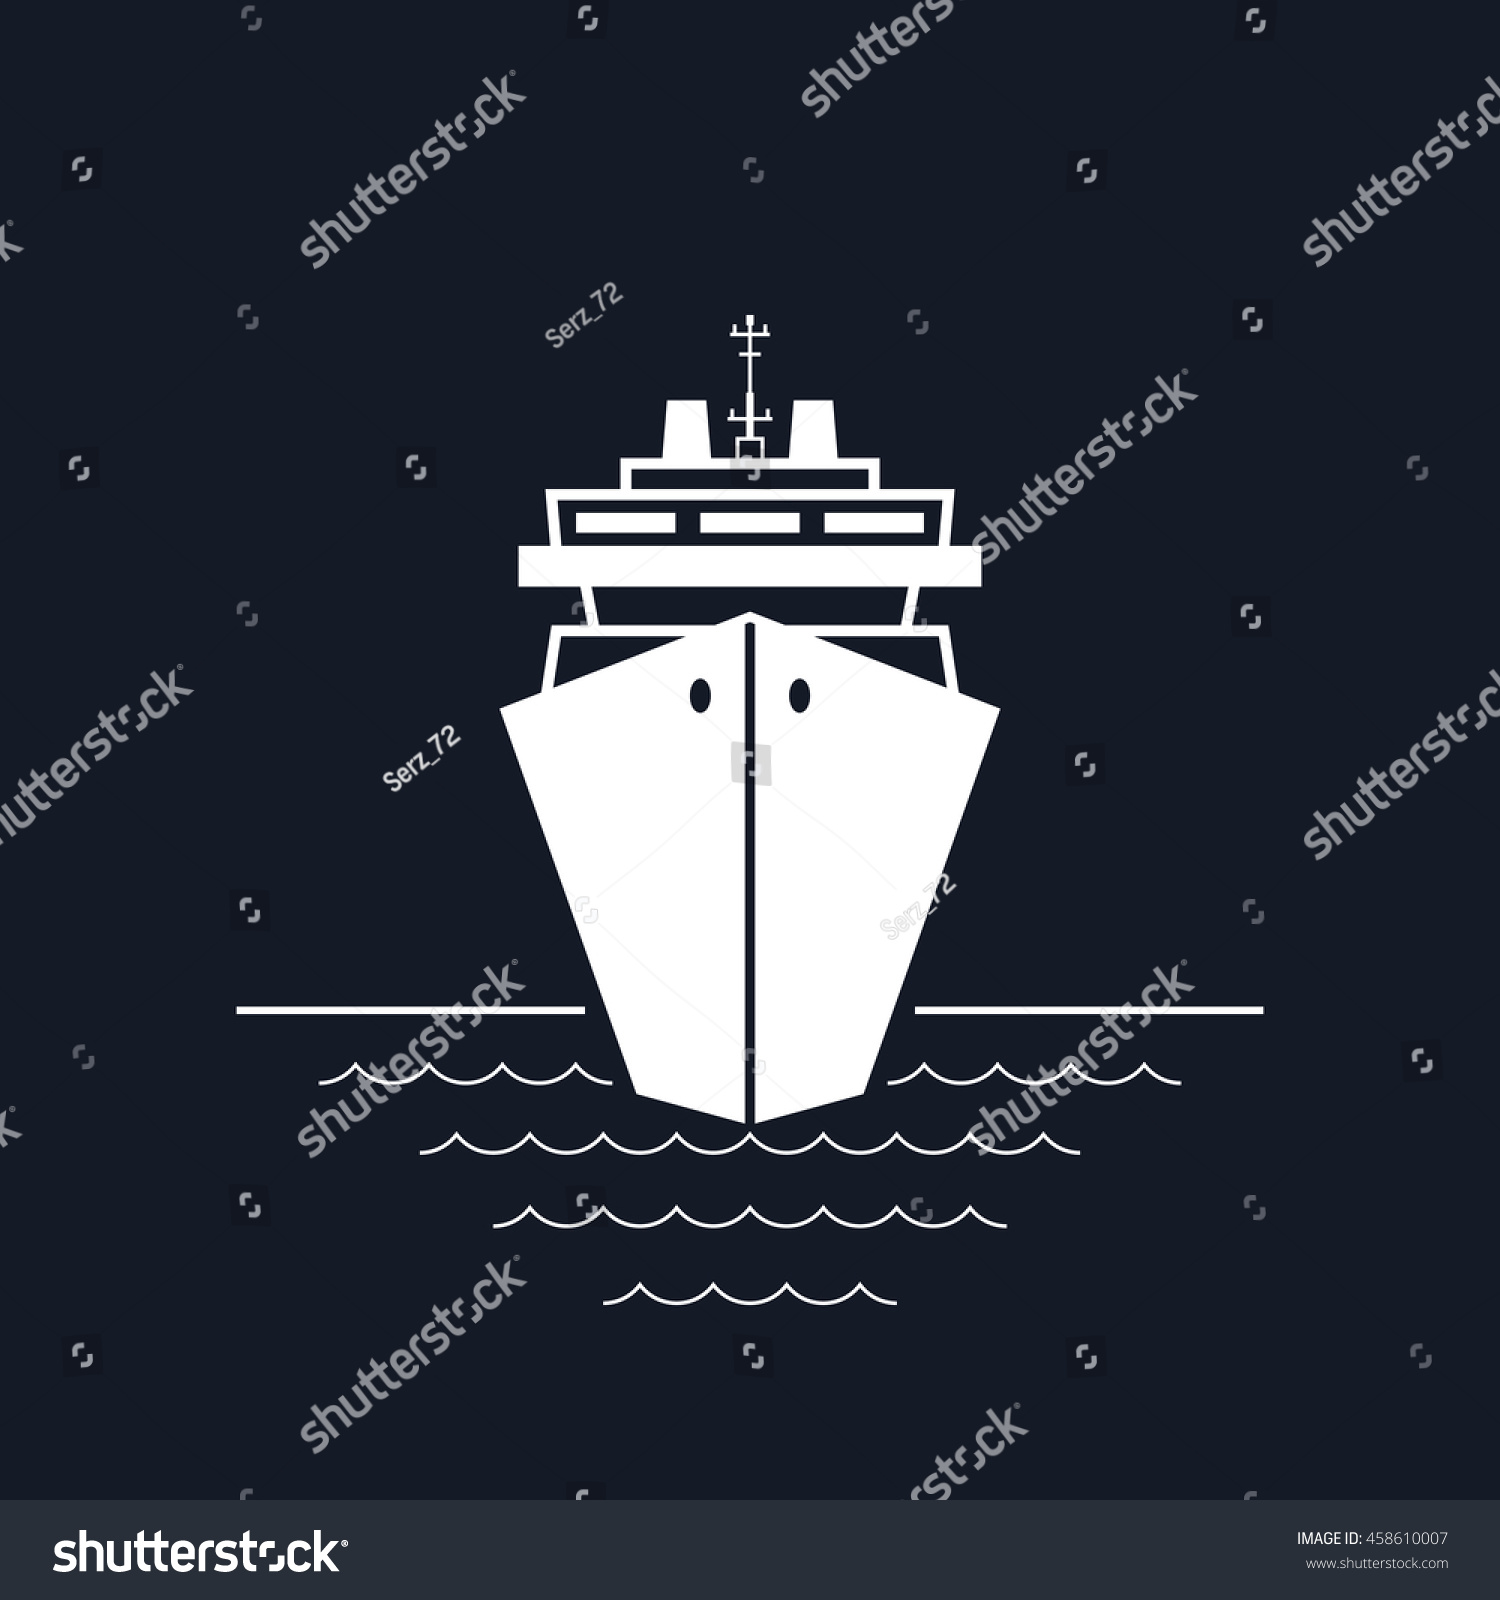 SVG of Cruise Ship Isolated on Black Background, a Front View of the Passenger Ship, Travel and Tourism Concept,Vector Illustration  svg